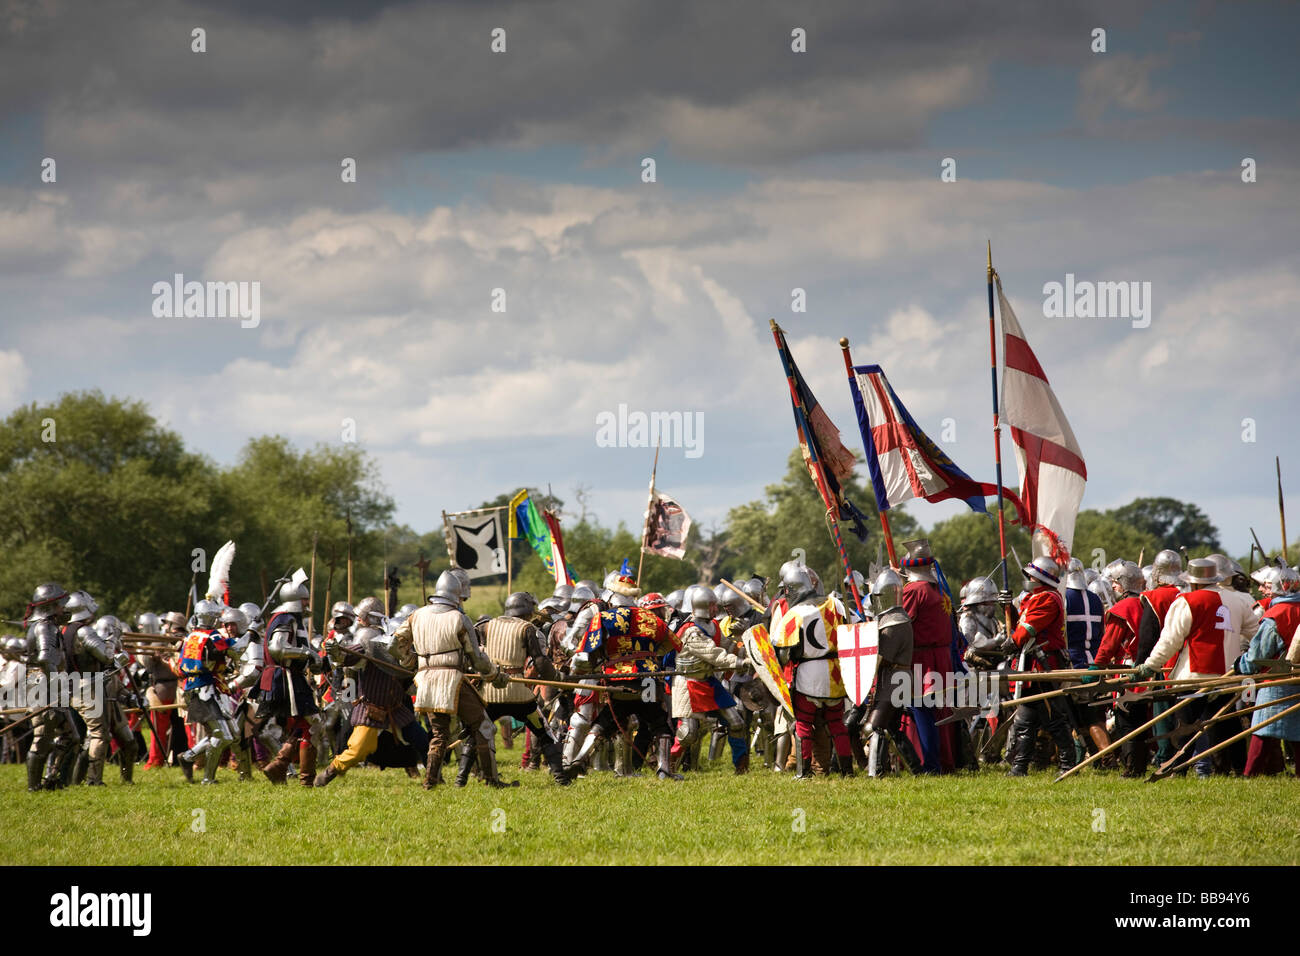 Reenactment of a medieval battle, the battle of Tewkesbury of 1471, Gloucestershire, UK Stock Photo